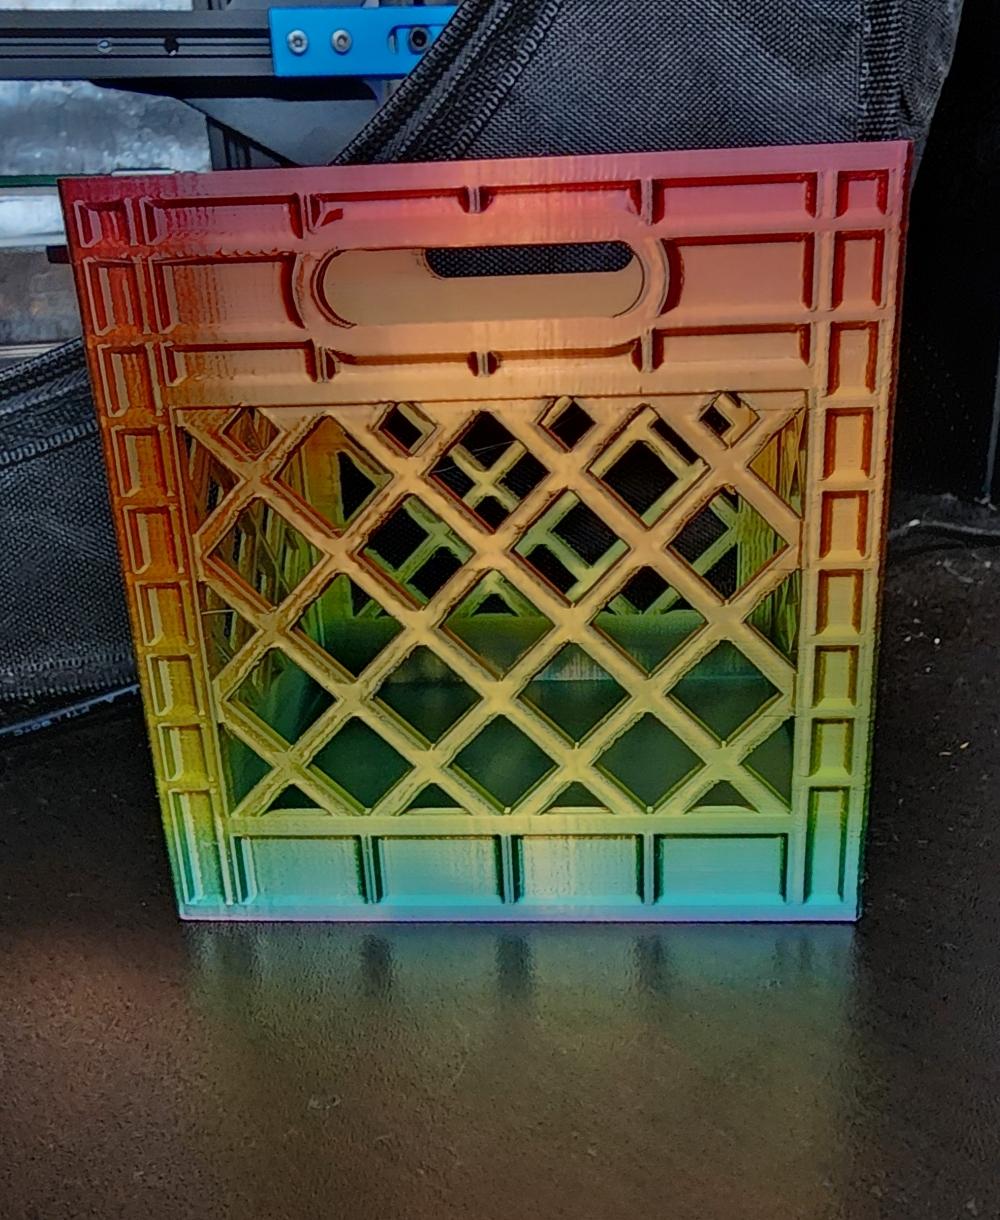 Support Free Milk Crate - Mika3d rainbow pla
No support 
No brim

This is the big one and have no trouble bridging on my ender 3. - 3d model